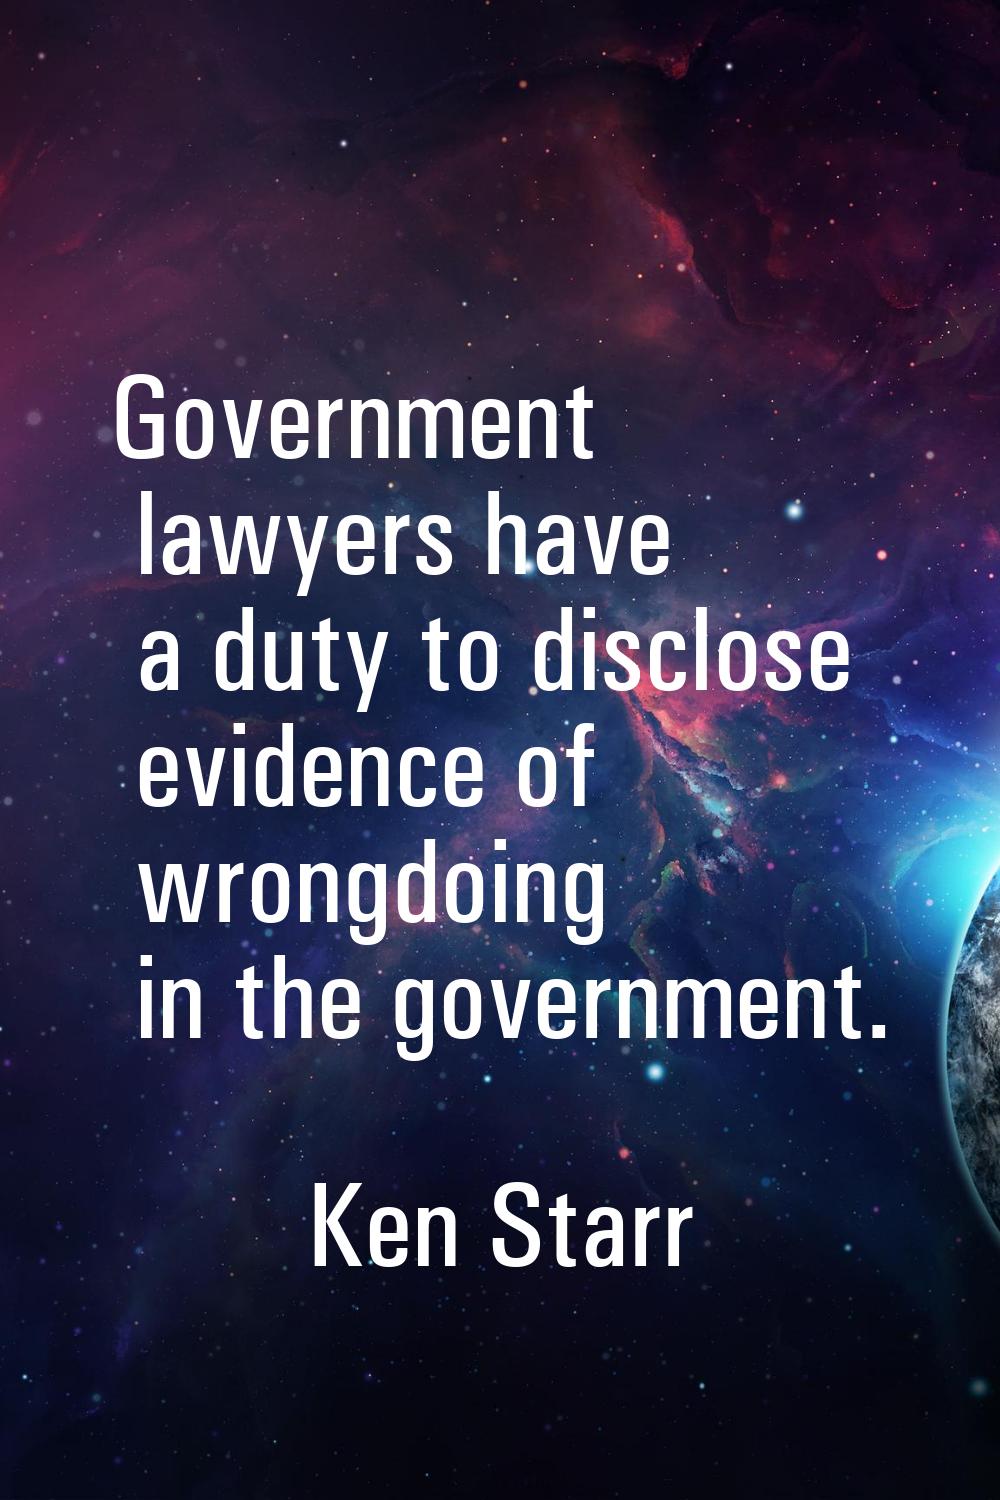 Government lawyers have a duty to disclose evidence of wrongdoing in the government.